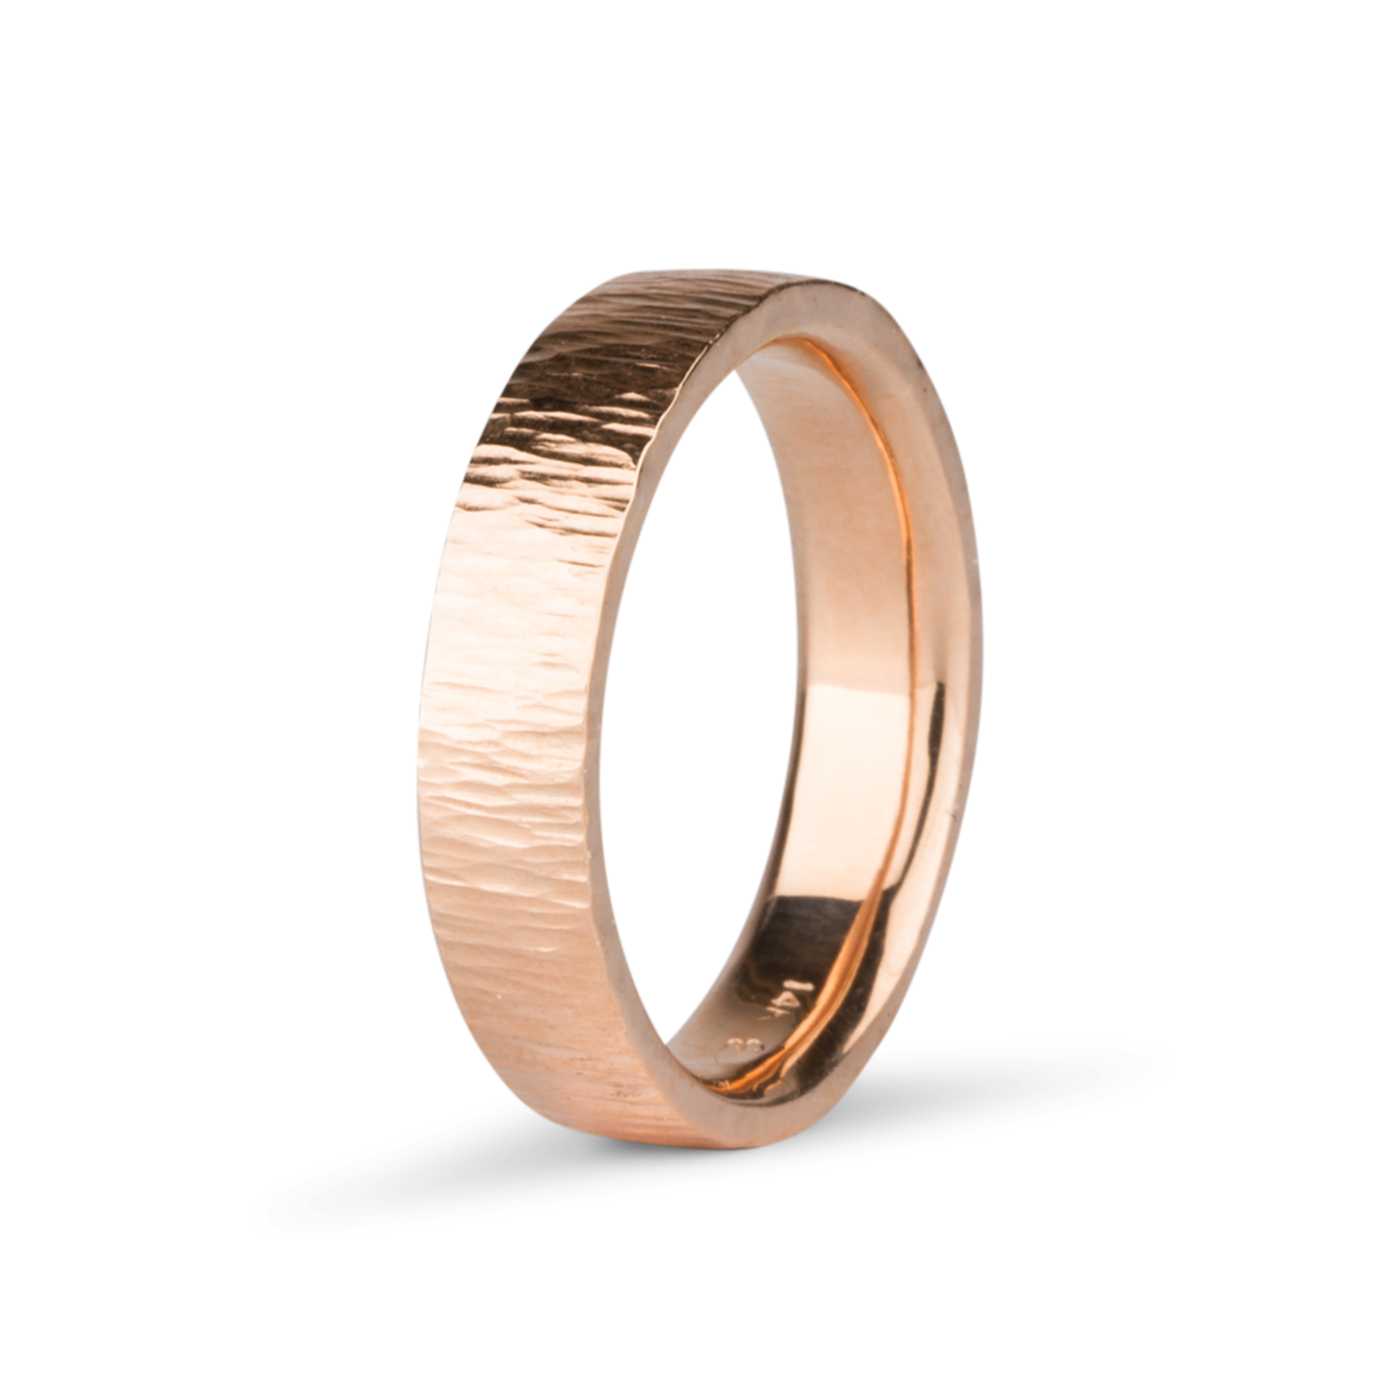 5mm wide Zion Vertical Hammered 14k Rose Gold Band by Corey Egan